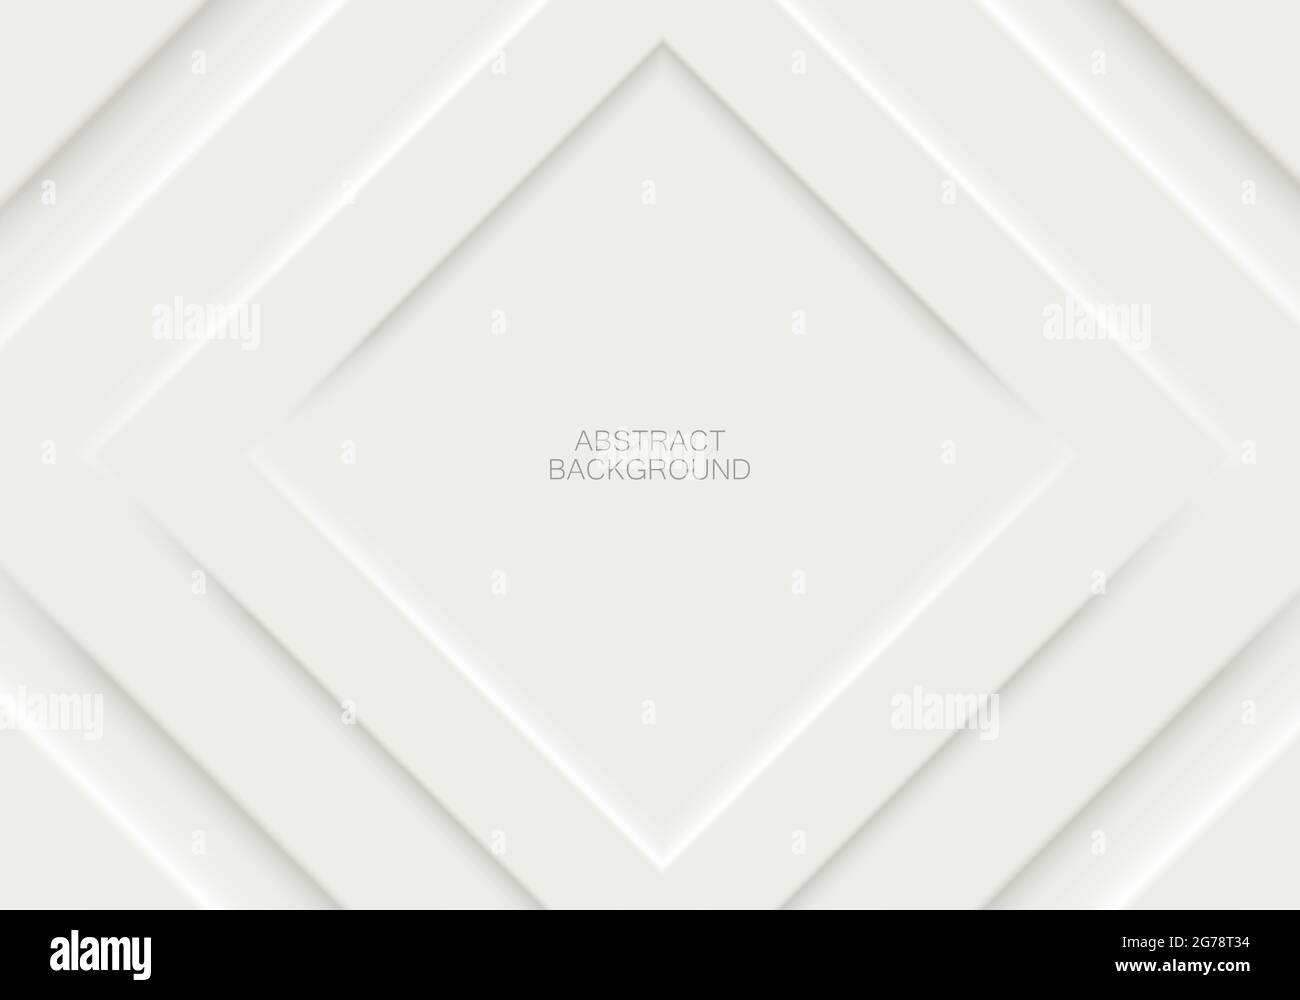 Soft clear futuristic design of square shape elements. Minimalistic white background. Abstract wallpaper vector background for banner, poster, flyer Stock Vector